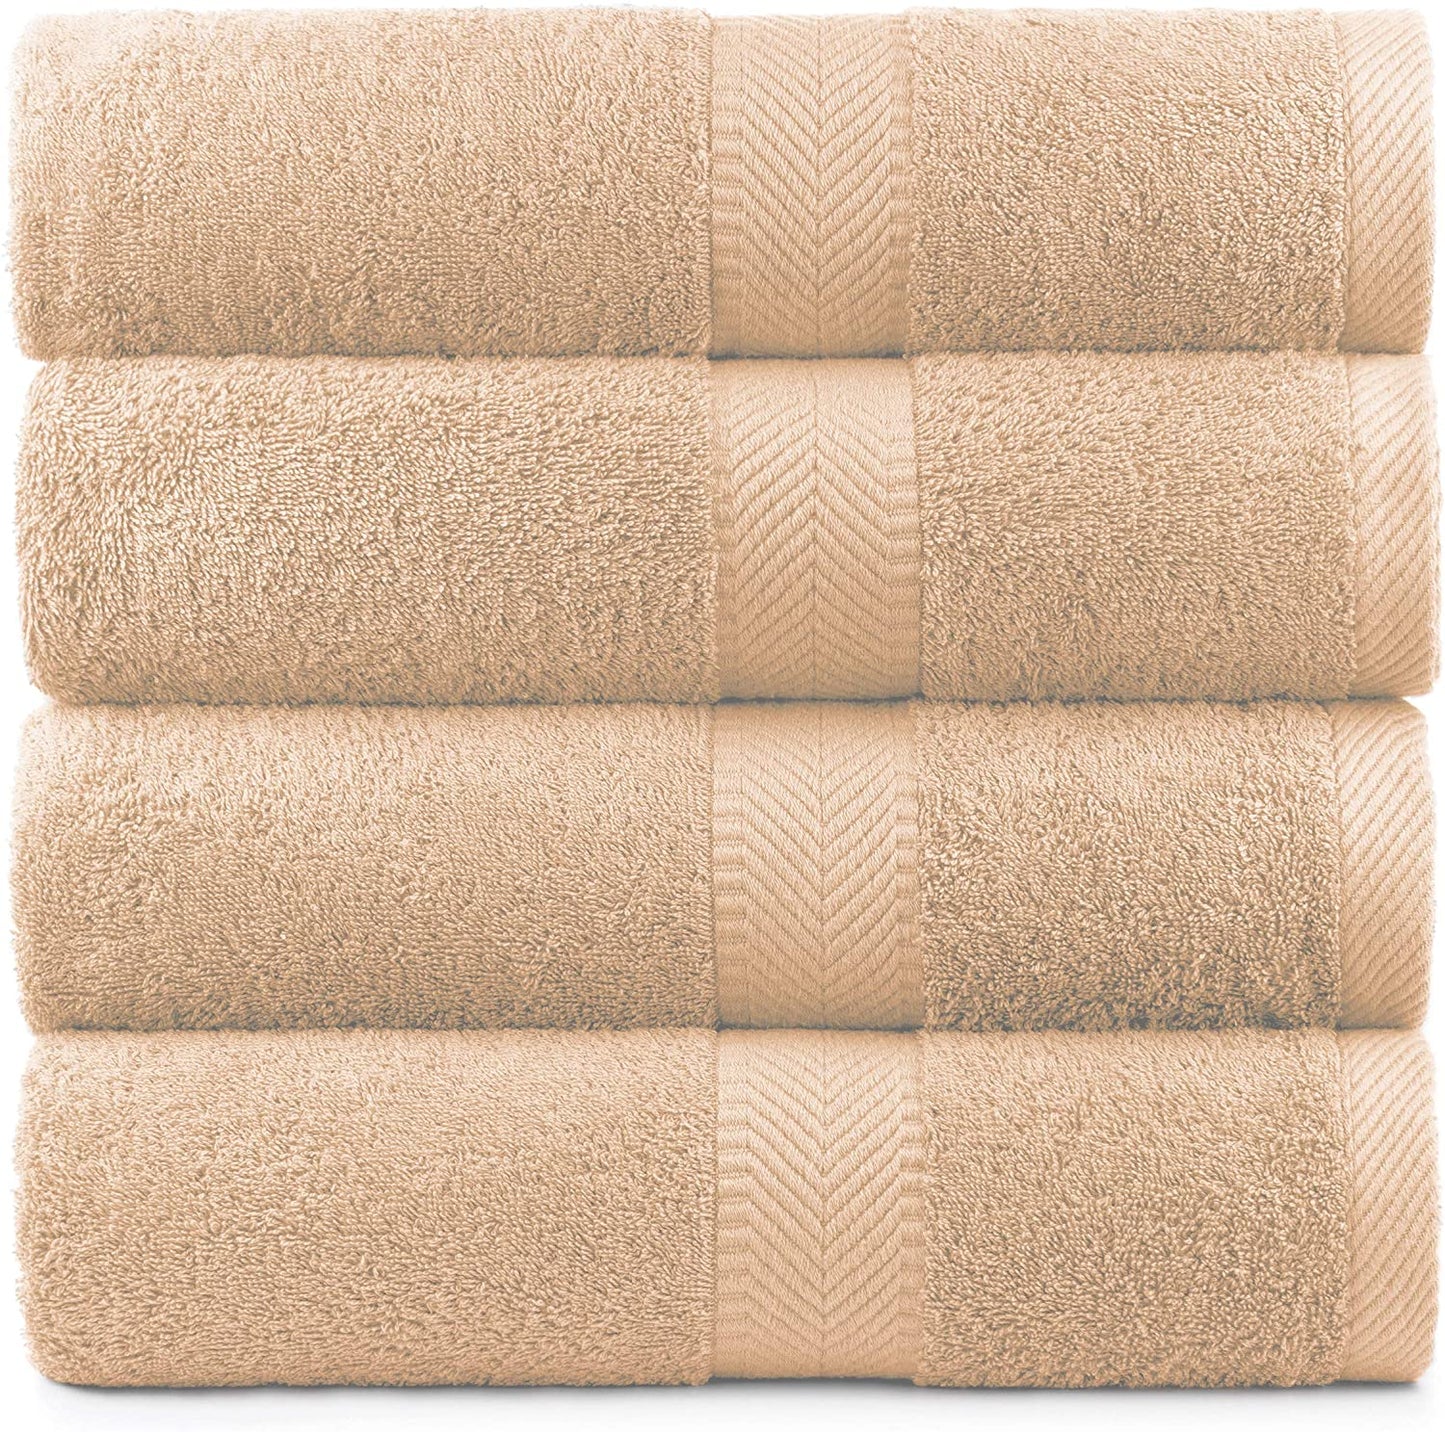 Terry Cotton Bath Towels - Set of 4 - 660 Gsm Thick